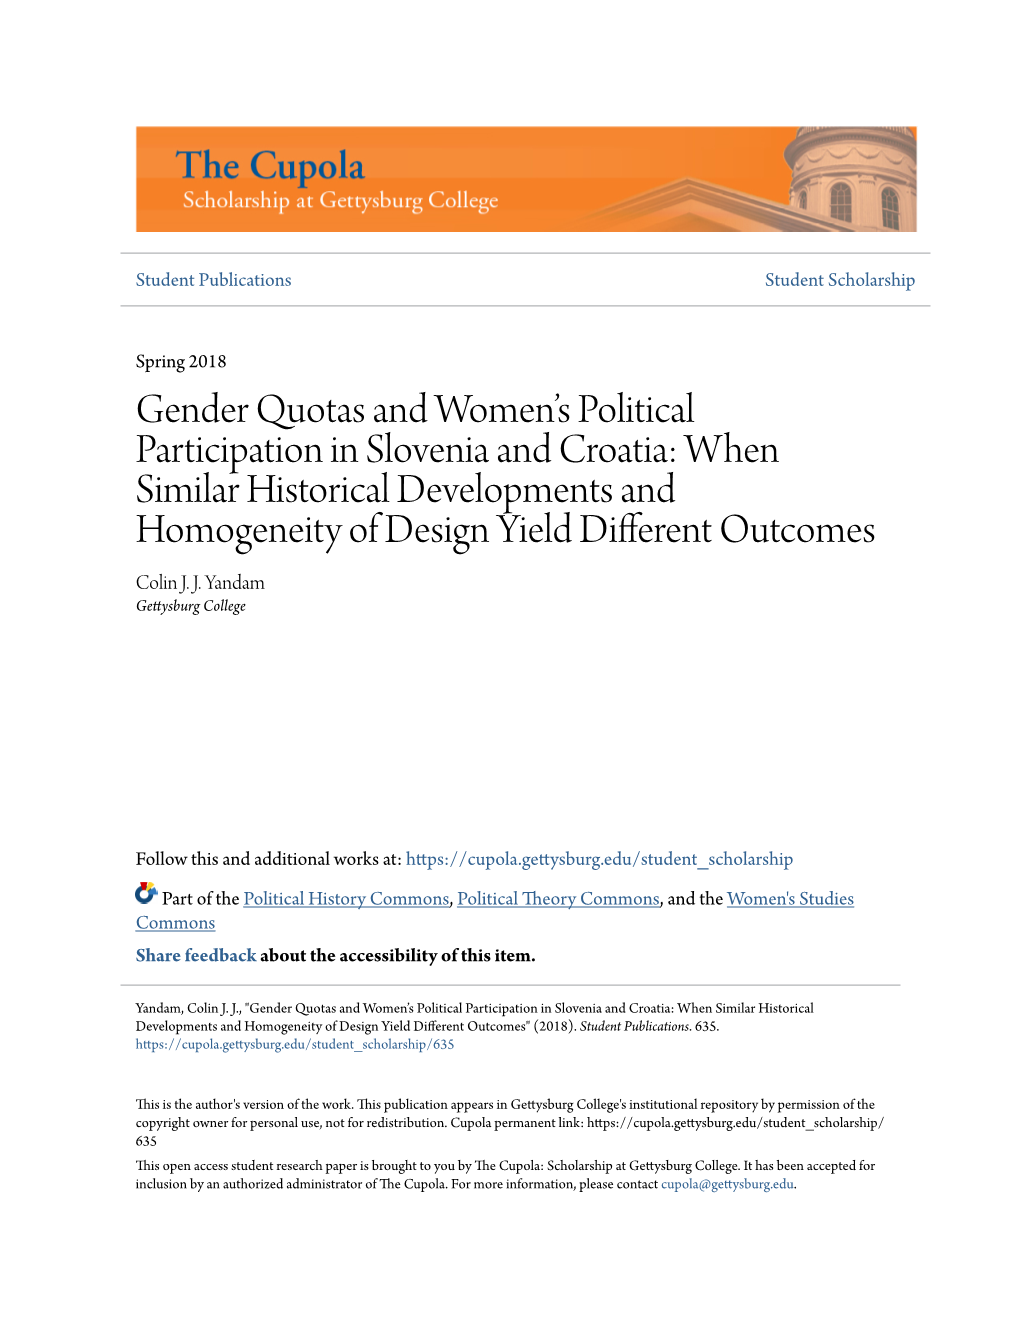 Gender Quotas and Women's Political Participation in Slovenia and Croatia